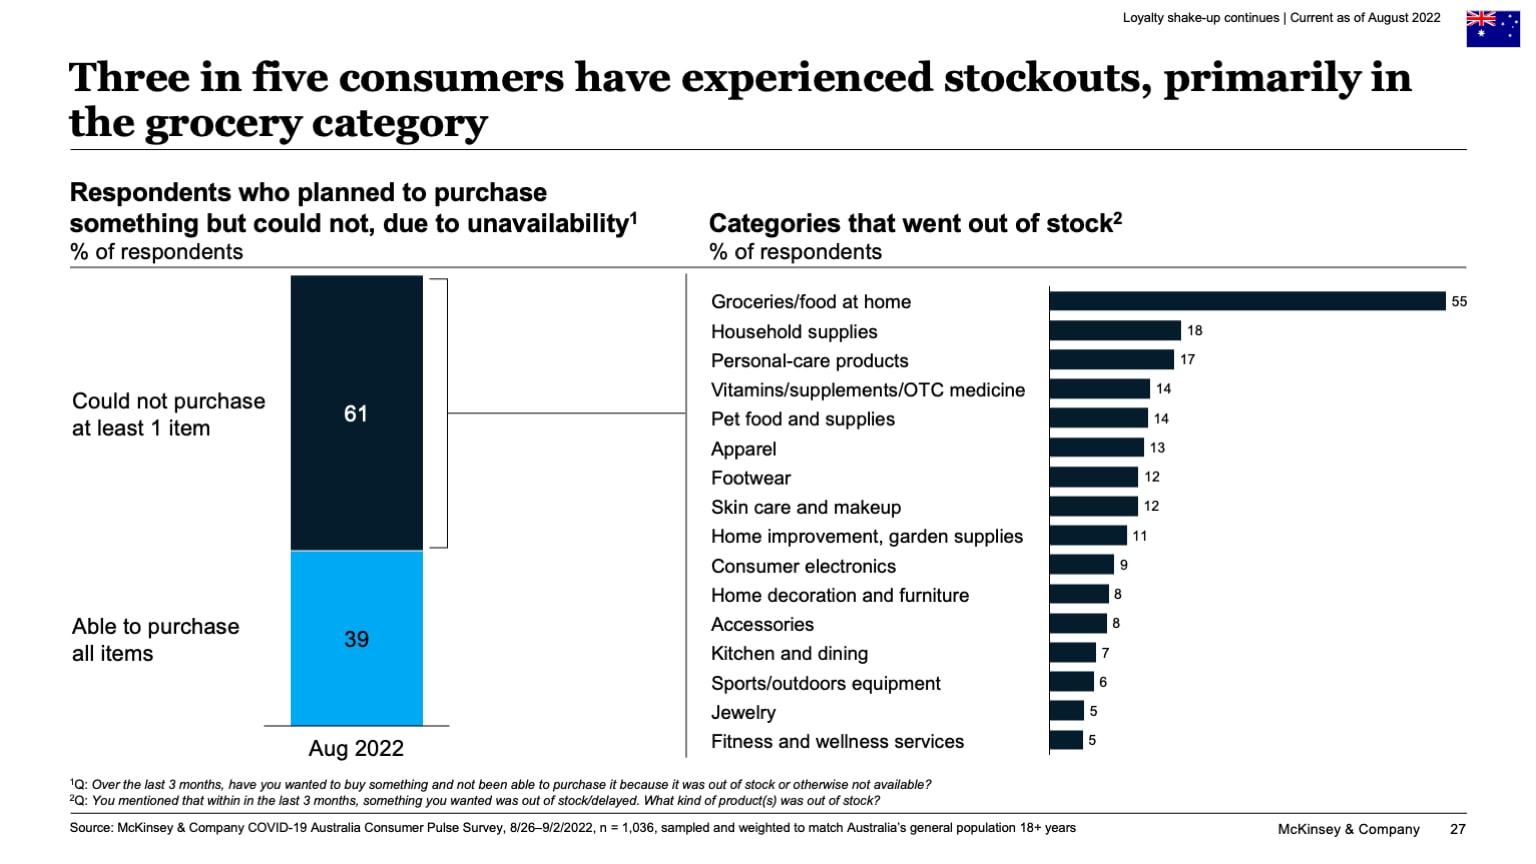 Three in five consumers have experienced stockouts, primarily in the grocery category